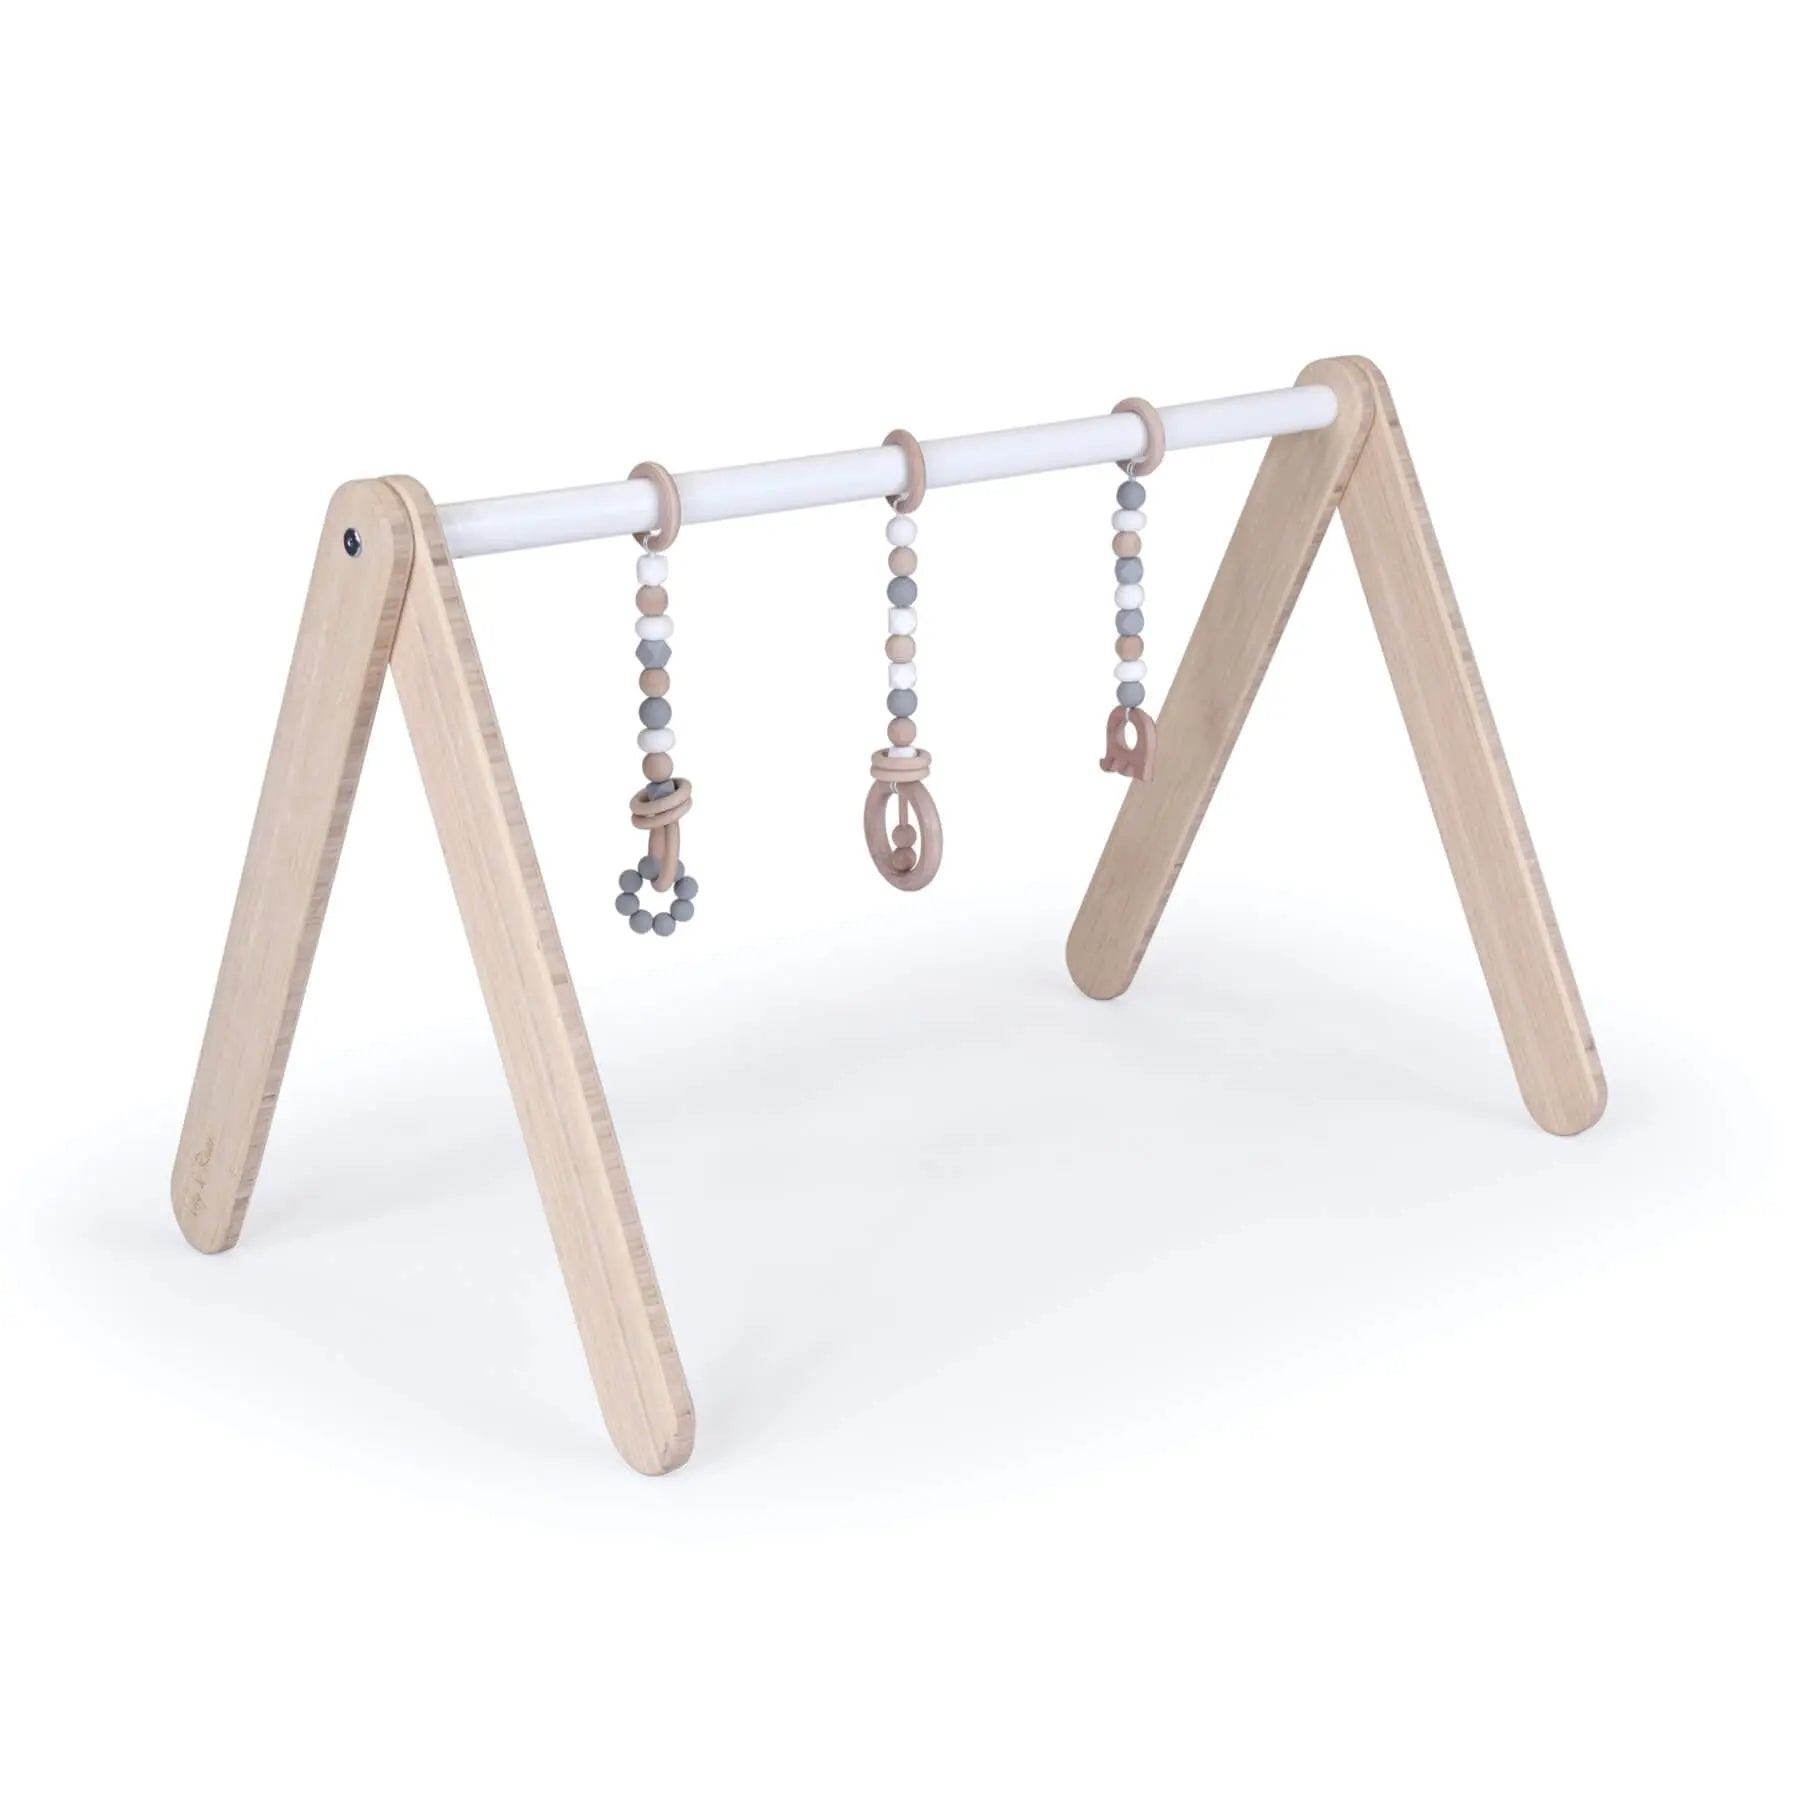 Lily & River Little Mobile Bamboo Play Gym Play Gyms